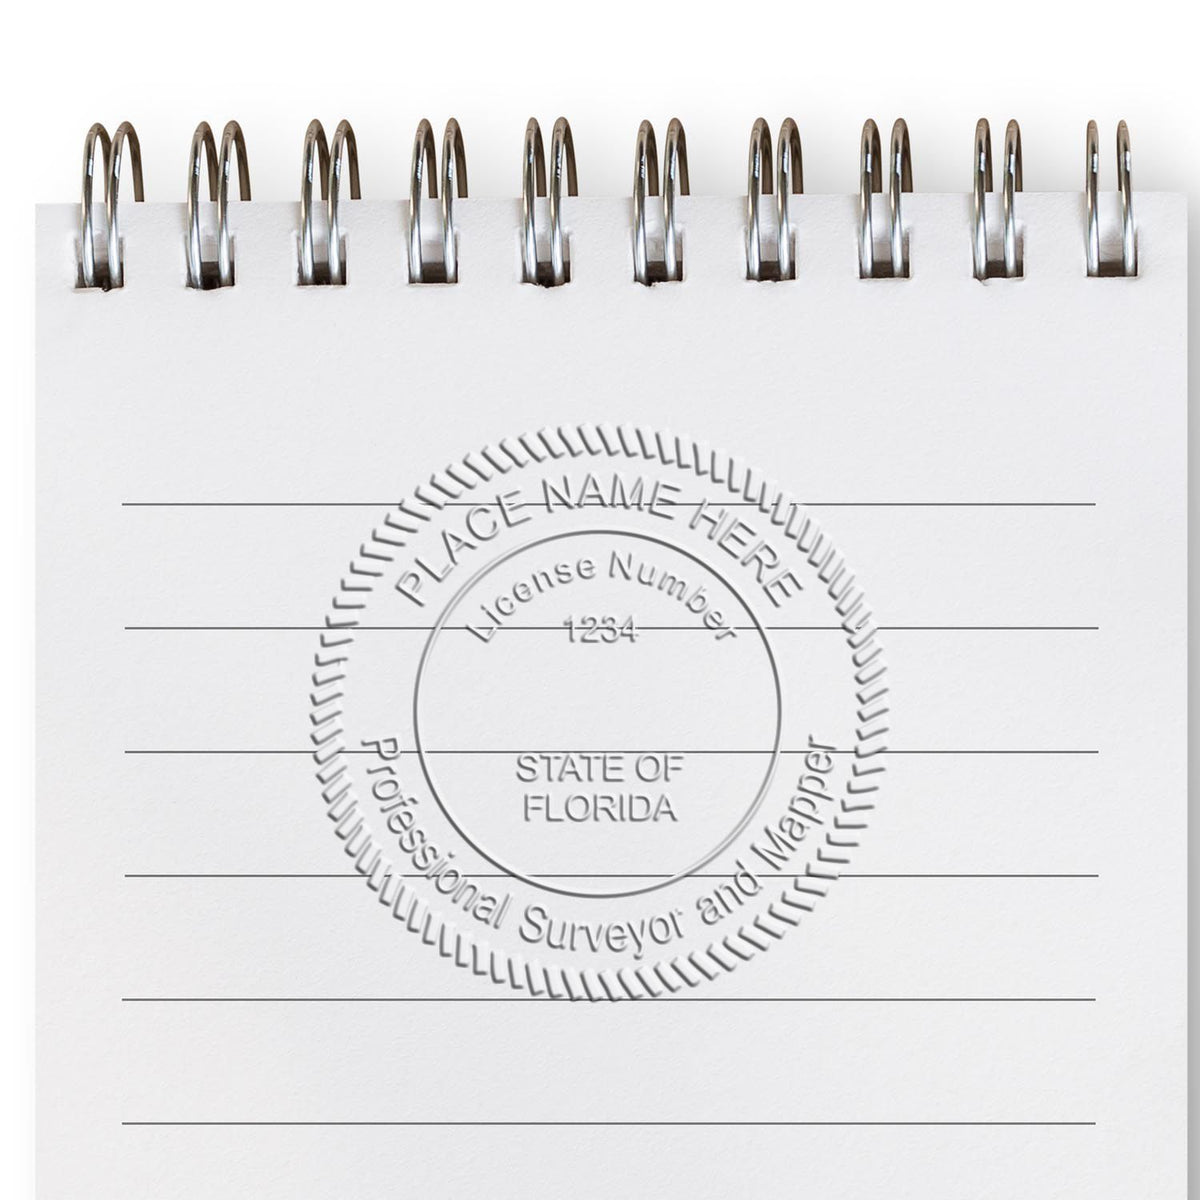 An alternative view of the Hybrid Florida Land Surveyor Seal stamped on a sheet of paper showing the image in use